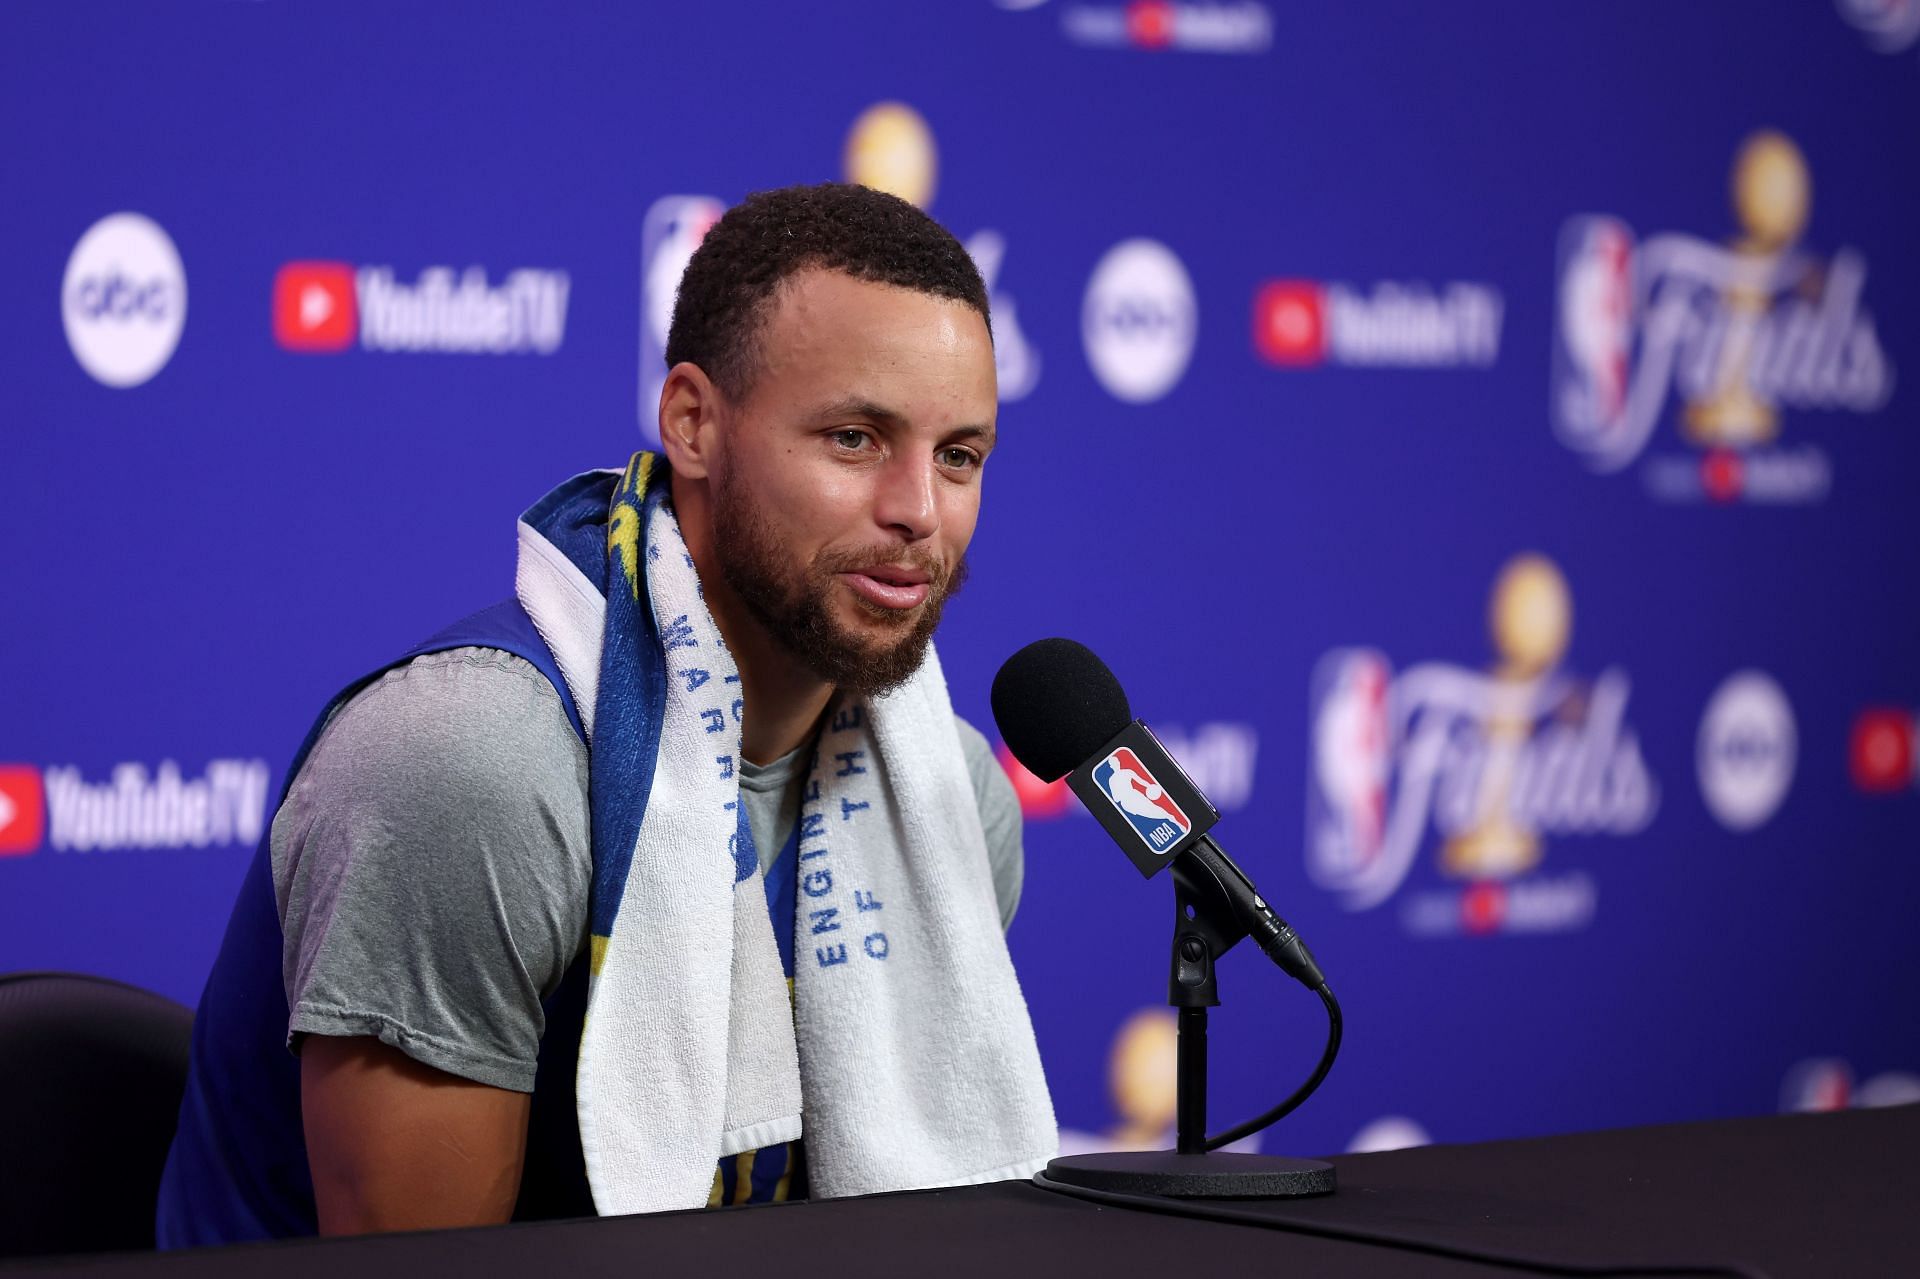 Steph Curry at 2022 NBA Finals - Media Day